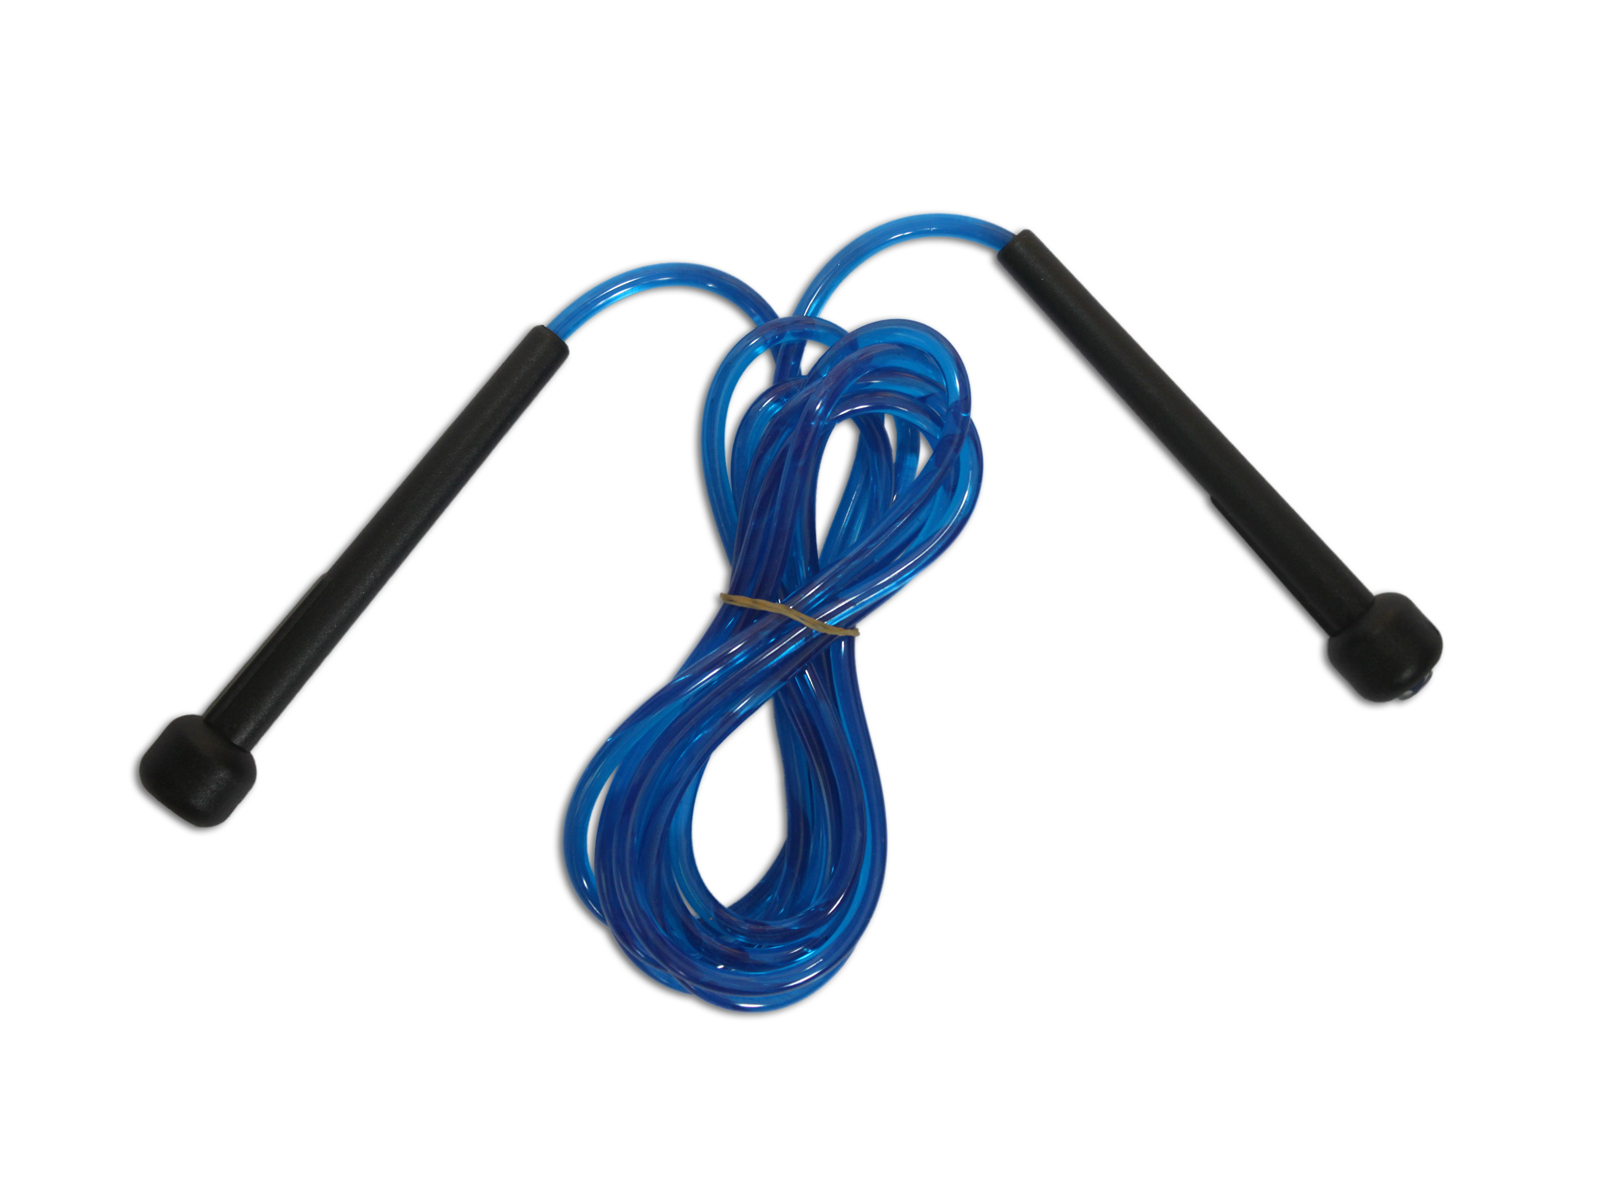 Skip rope with handles